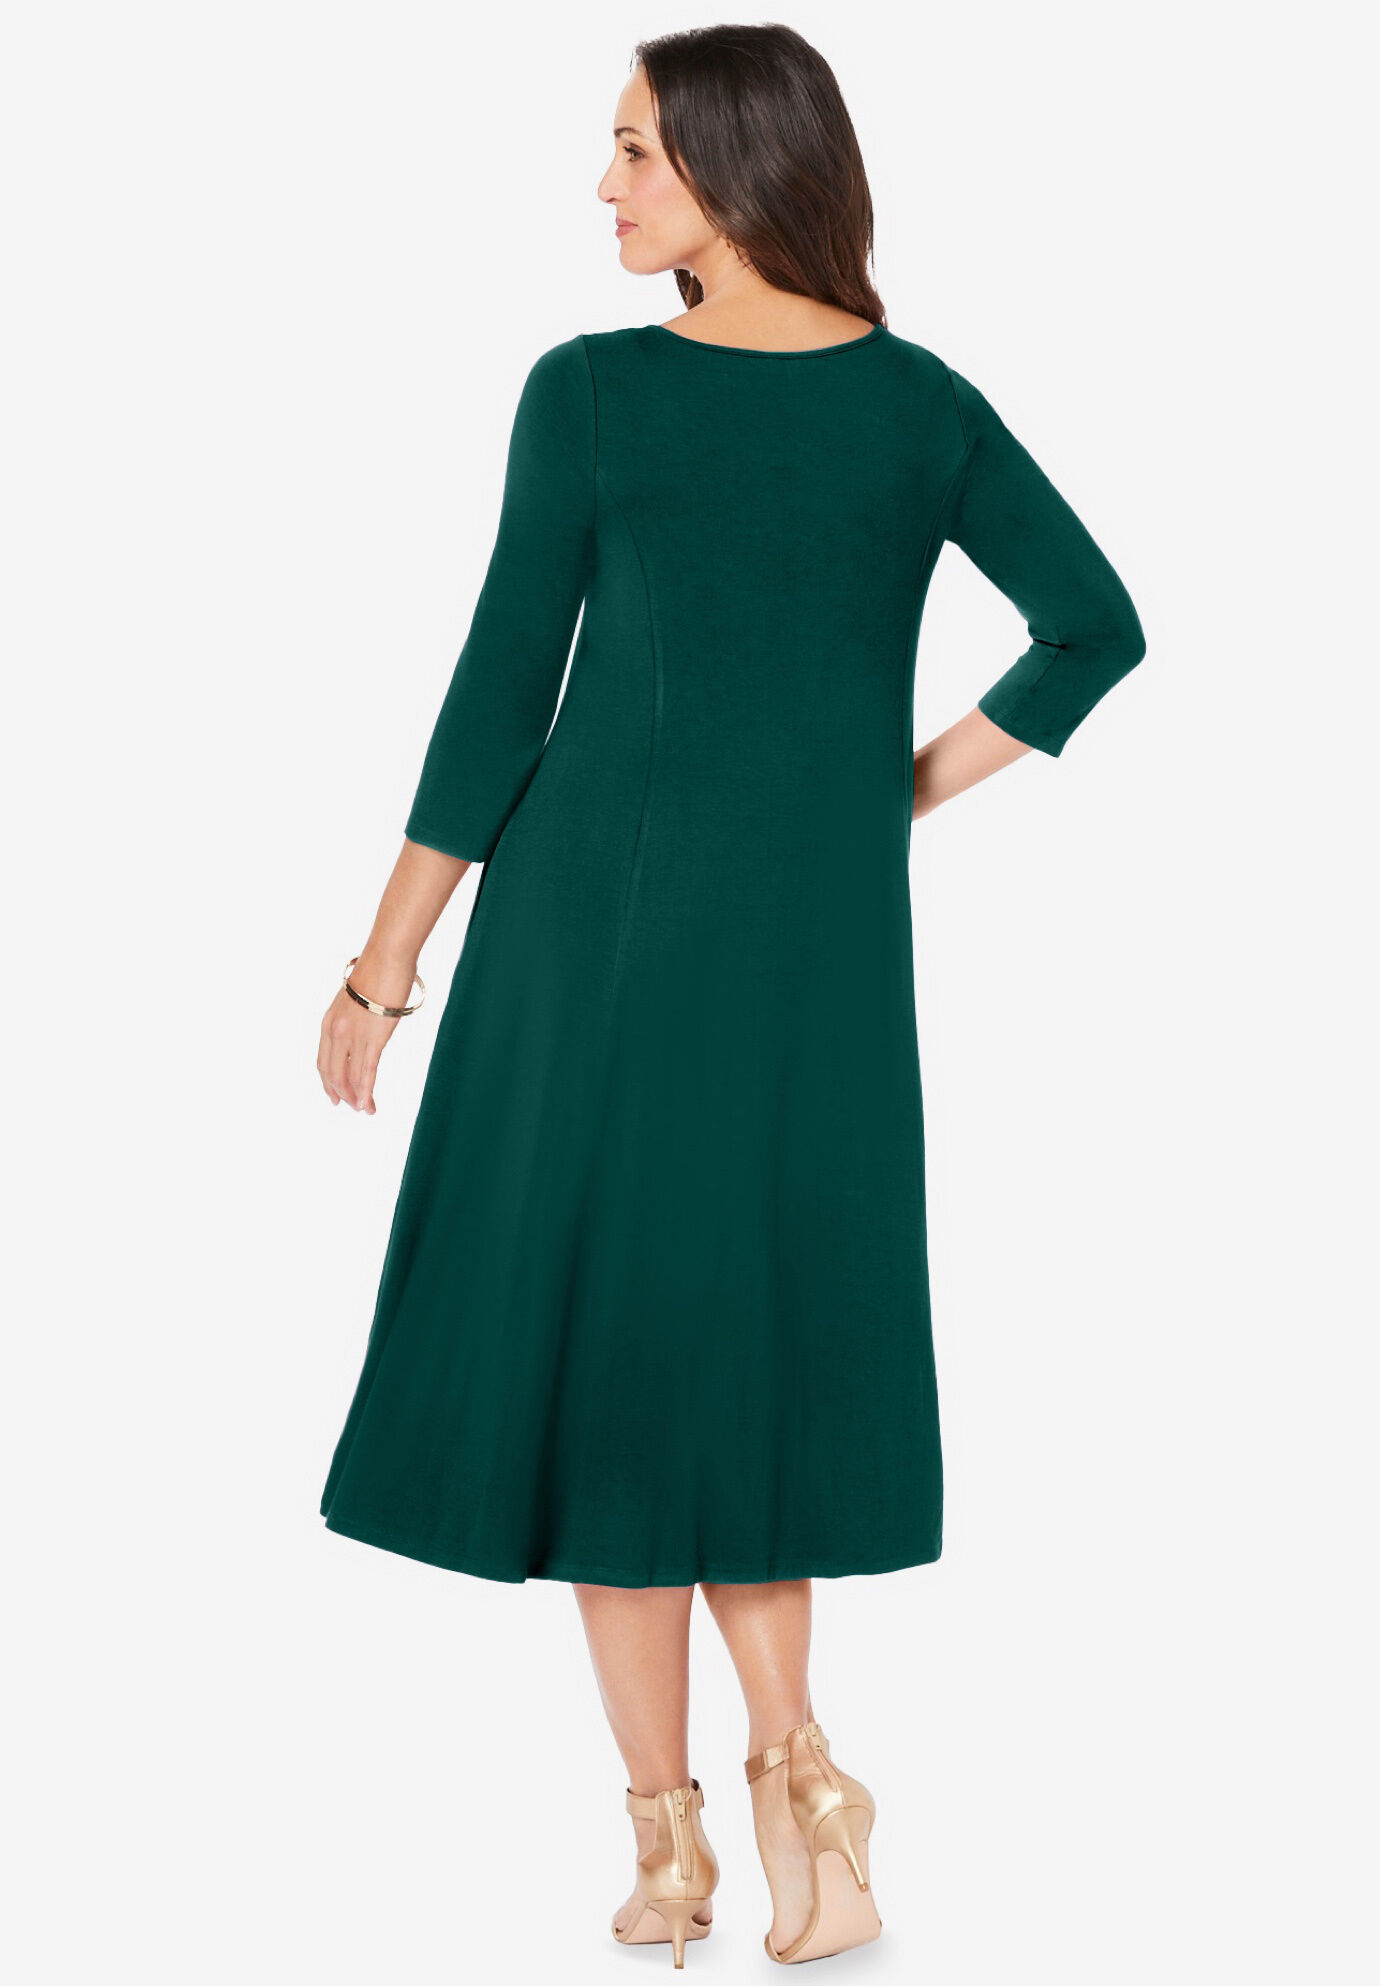 Wholegarment Knit Dress her lip to-